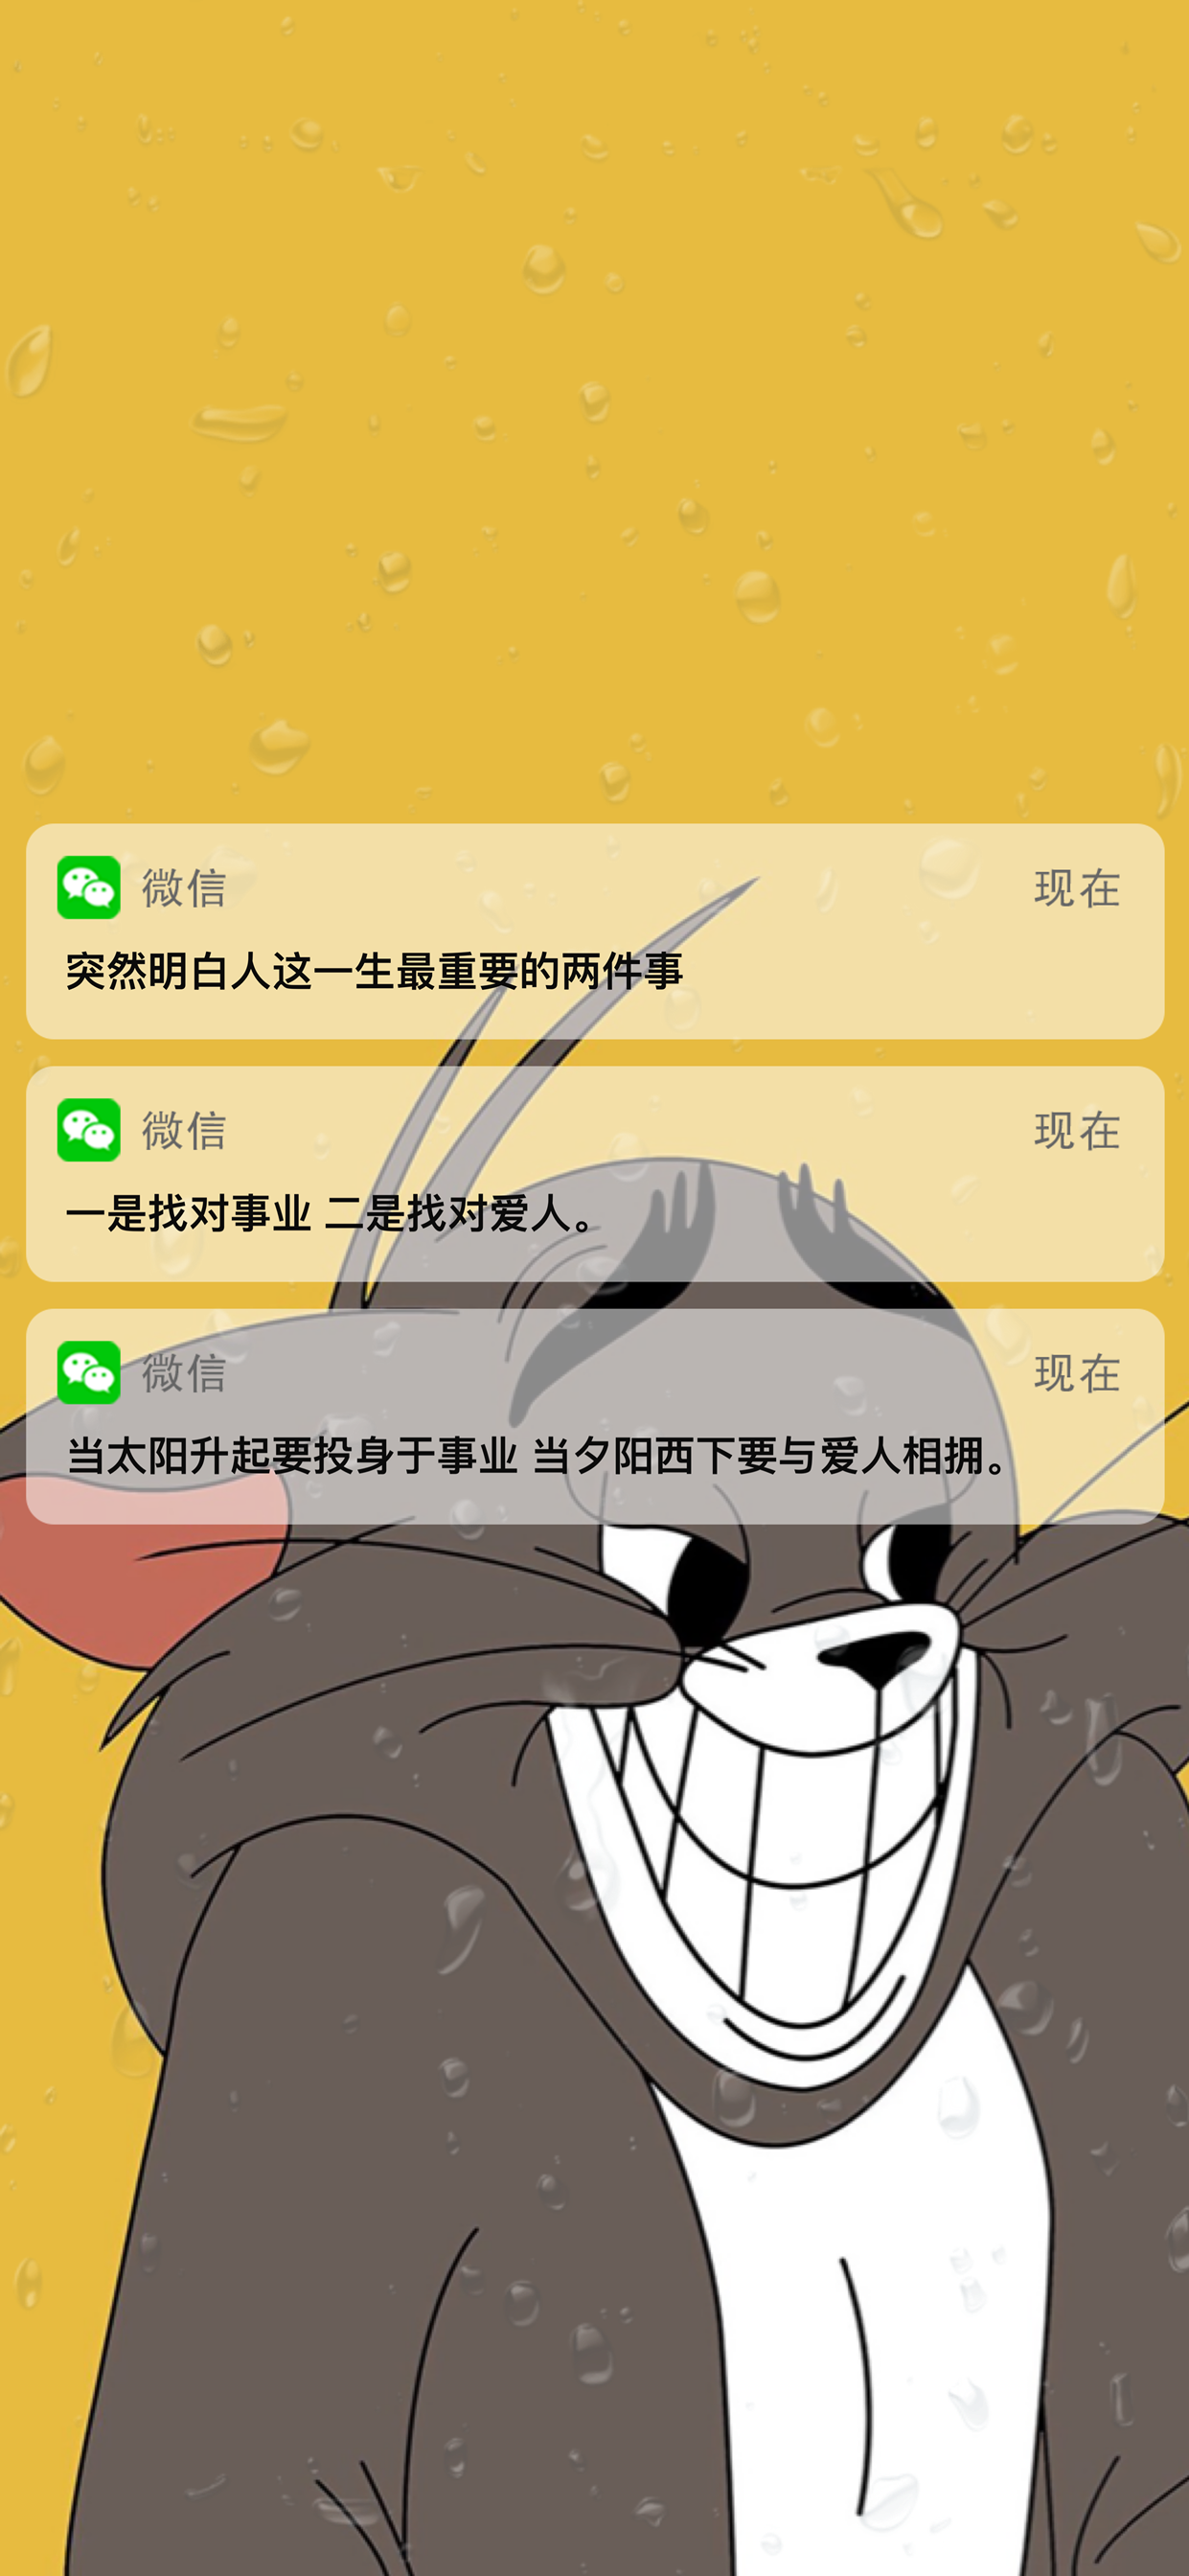 "WeChat Notification Wallpaper" You should understand how pale the text is